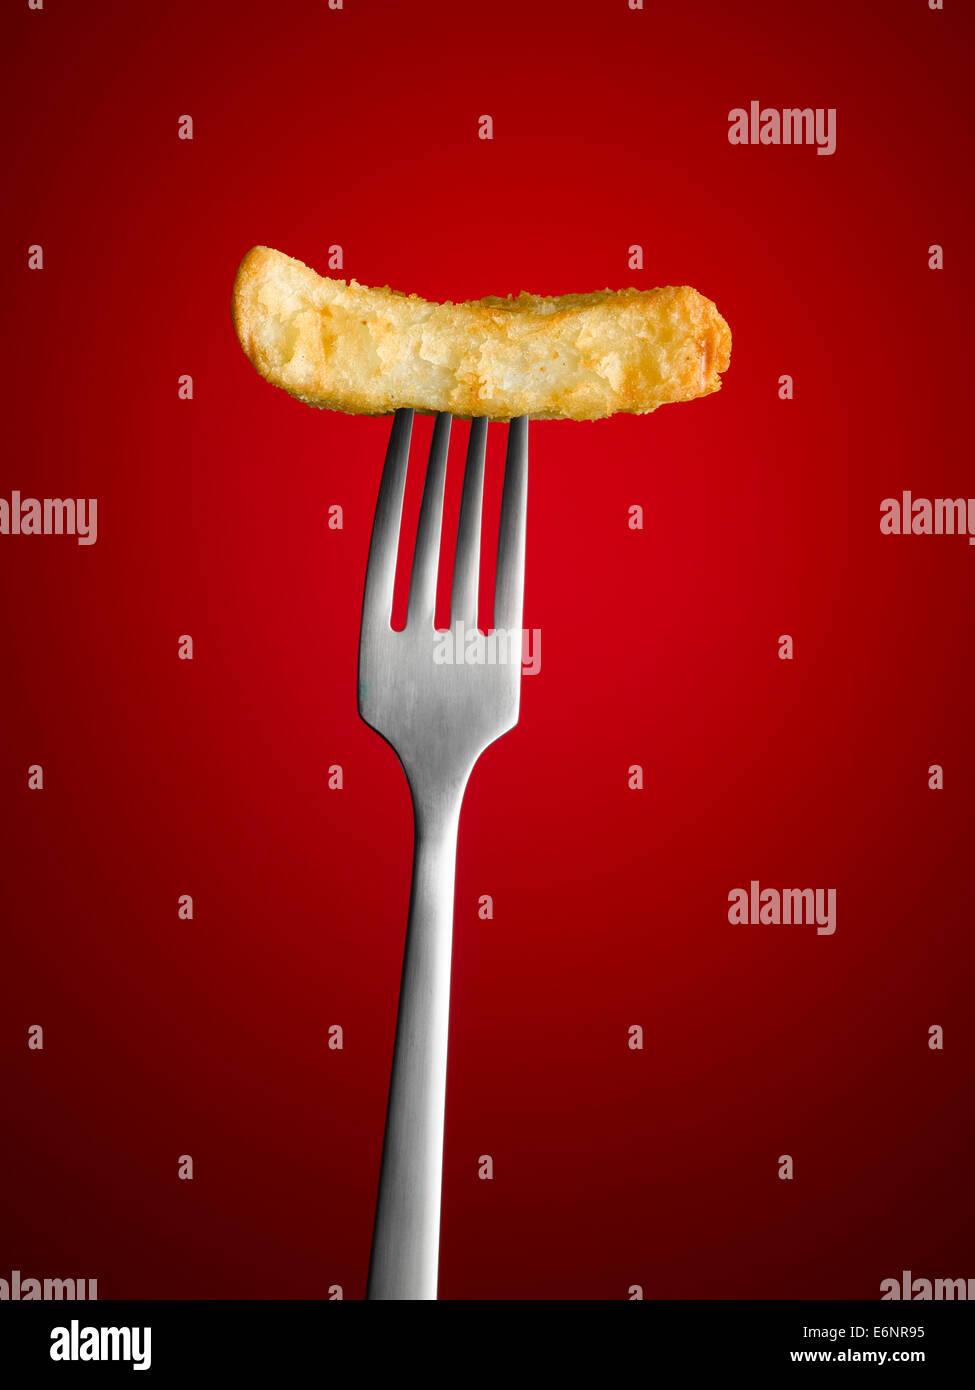 Chip on fork Stock Photo